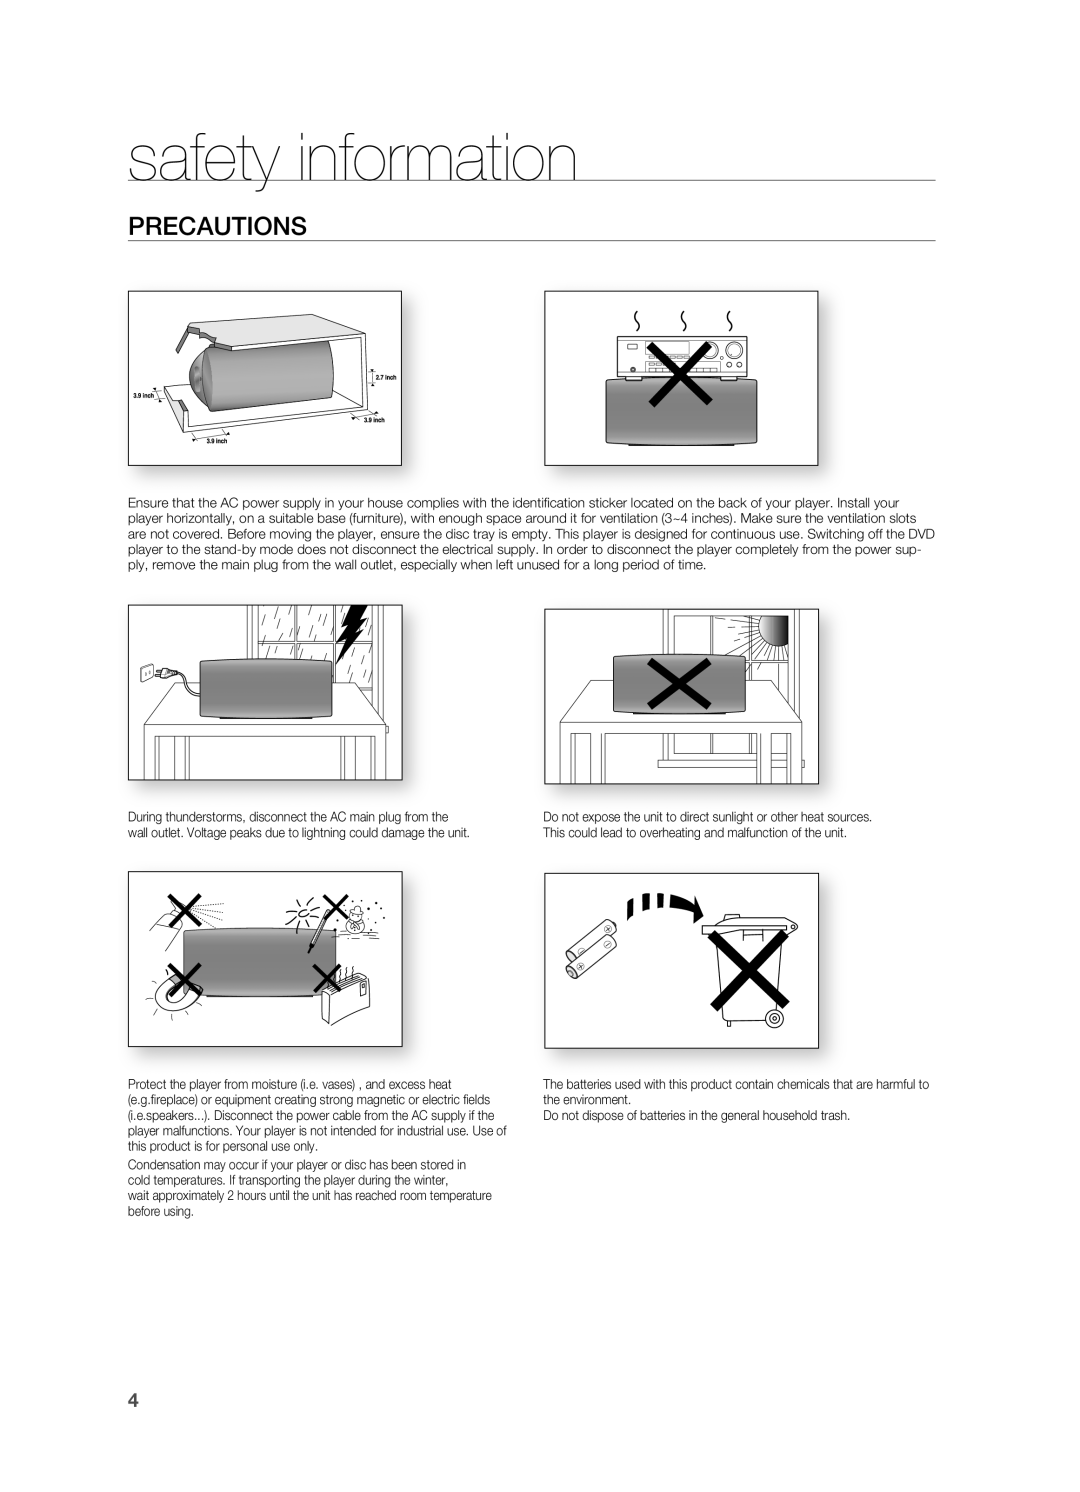 Samsung HT-A100 user manual PrECAUTIONS, safety information 